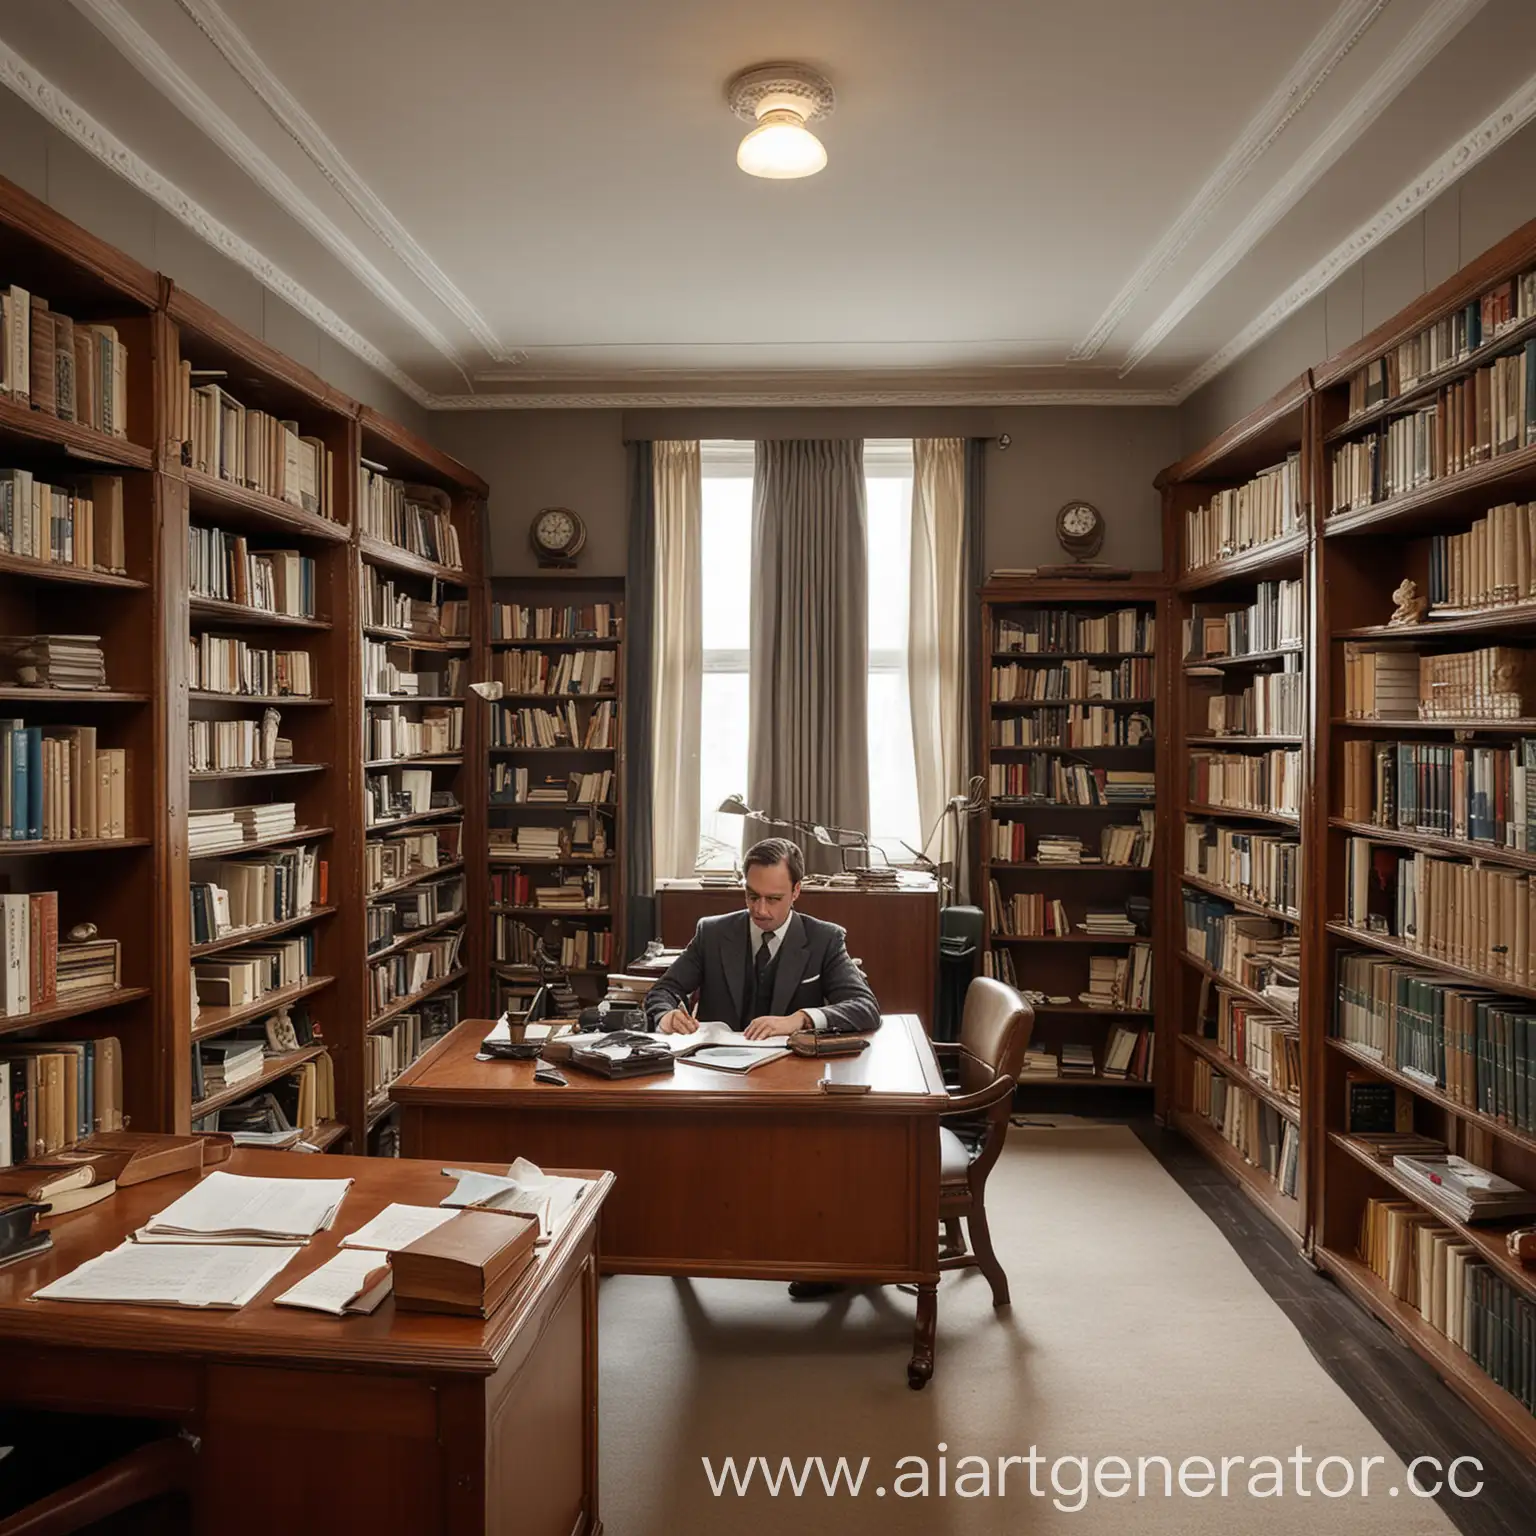 1930s-Style-Office-with-Bookcases-and-Writing-Man